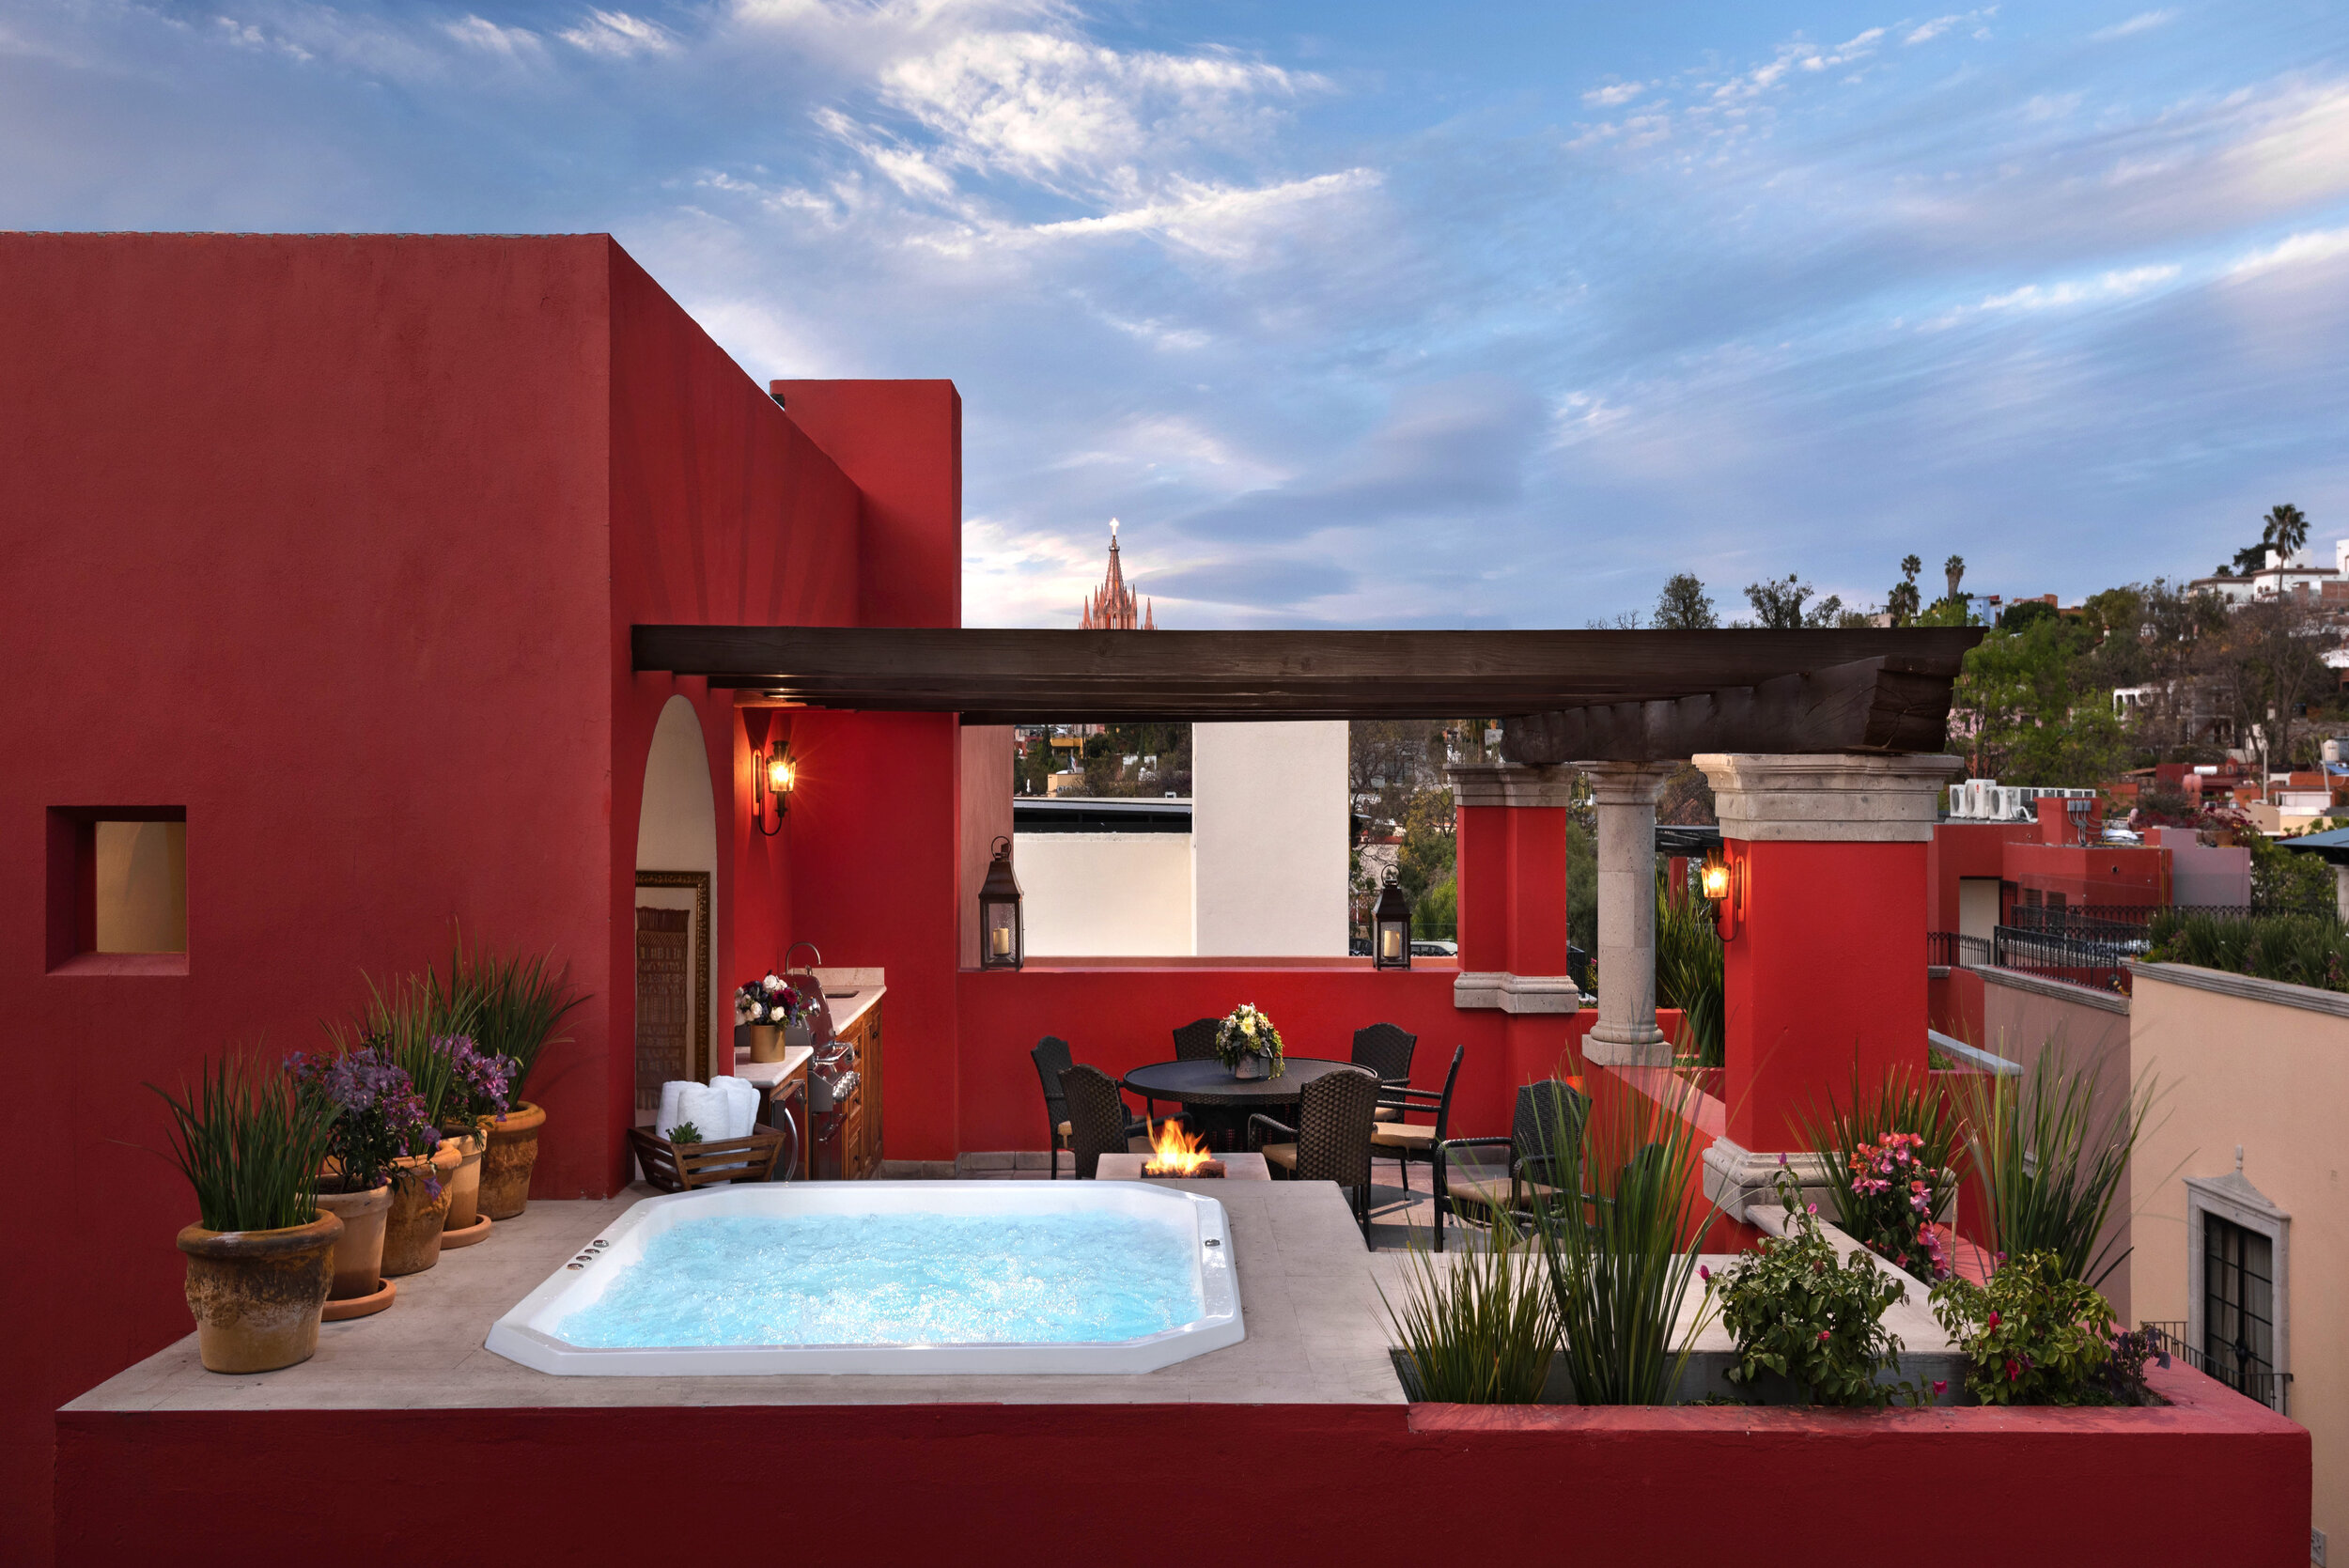   Rooftop of the 4-bedroom residence (photo credit: Rosewood Hotels)  